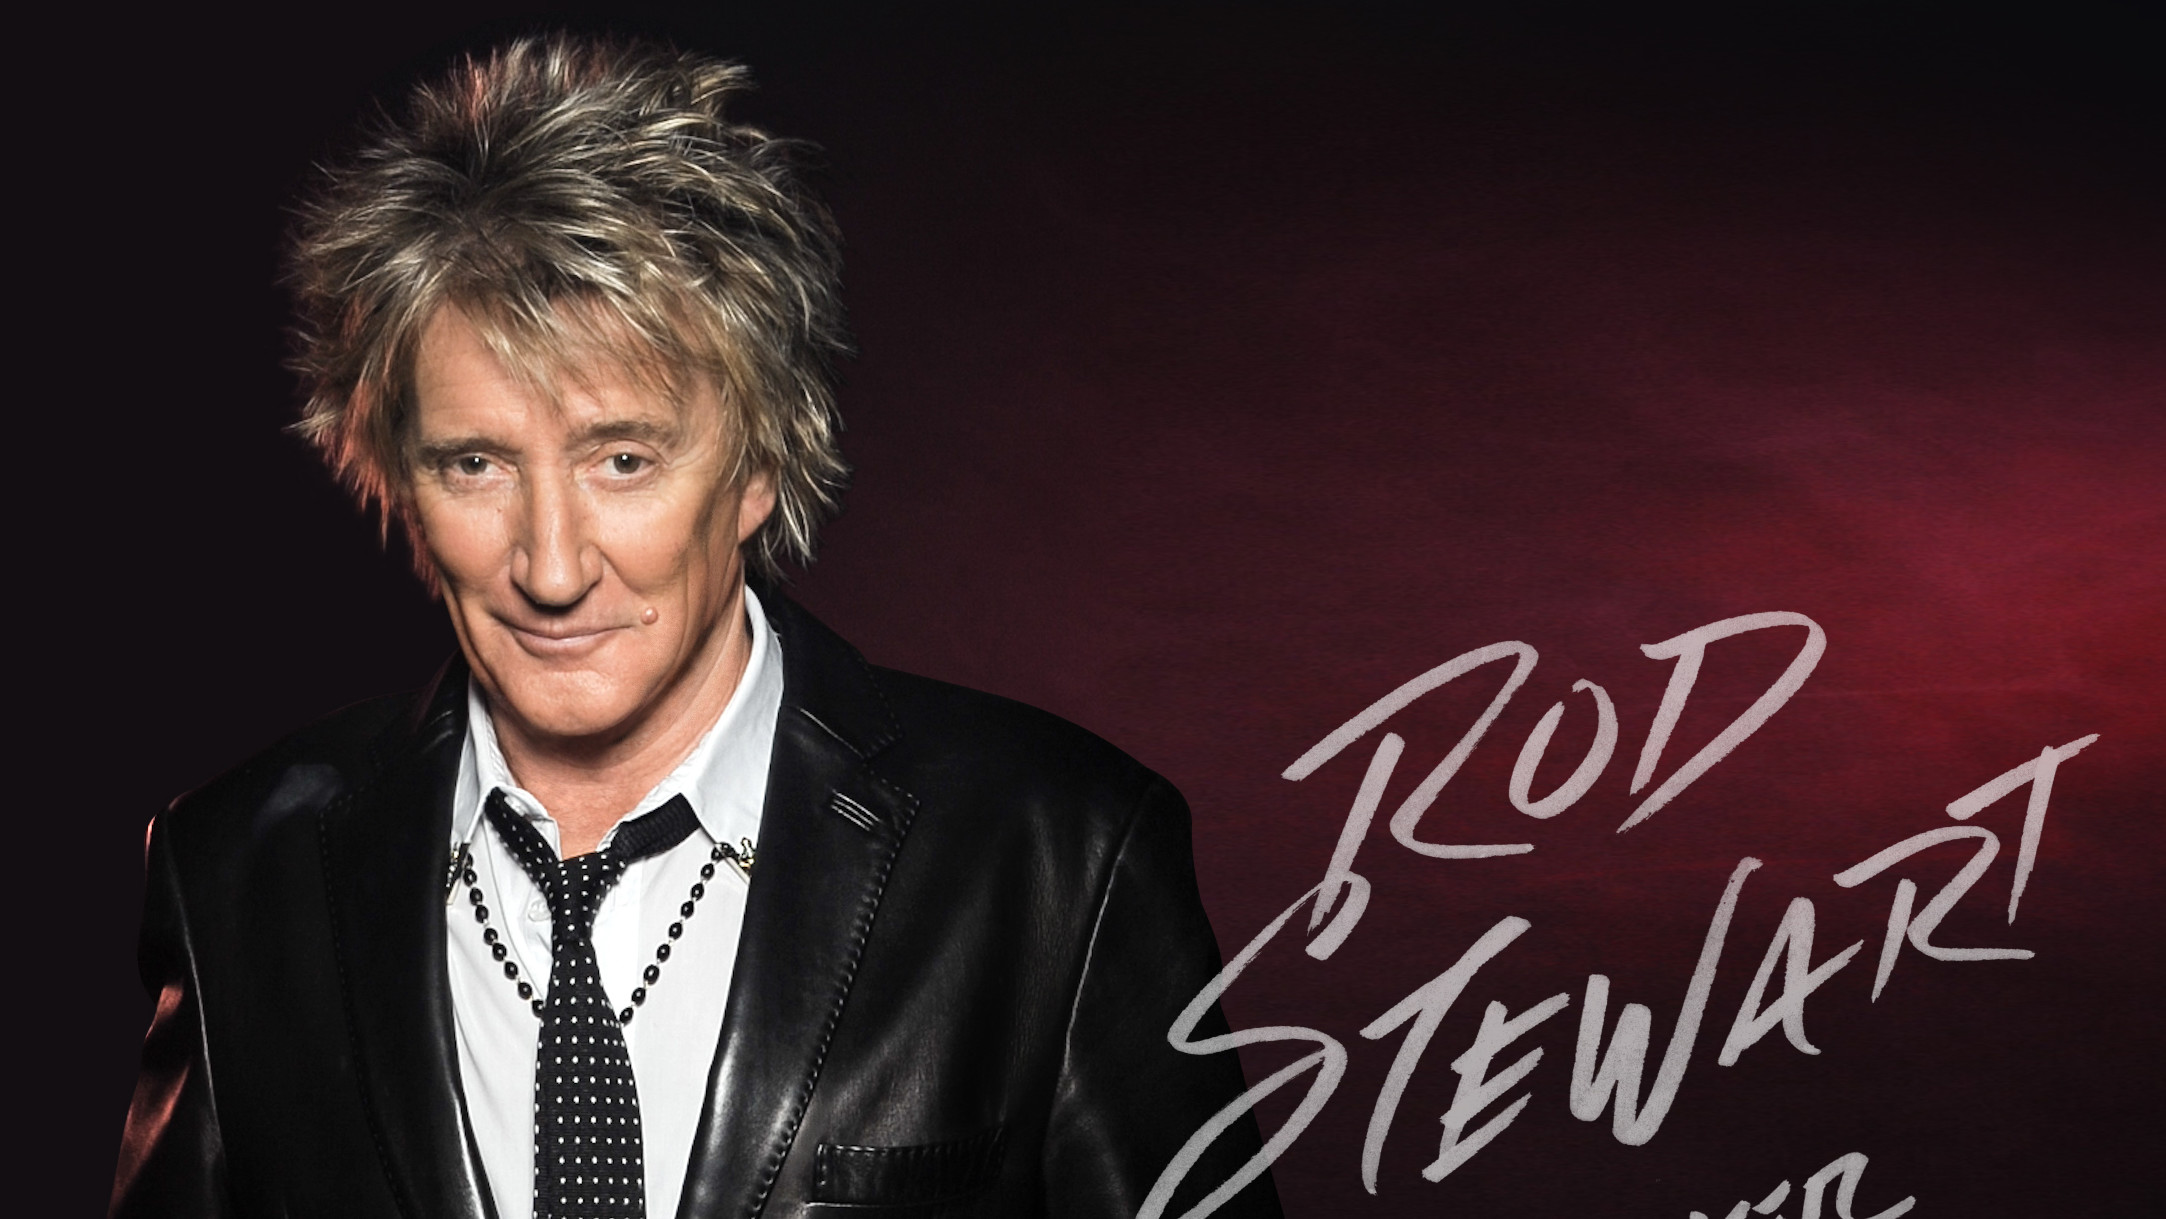 Rod Stewart – Another-Country Cover | BackStage360.com